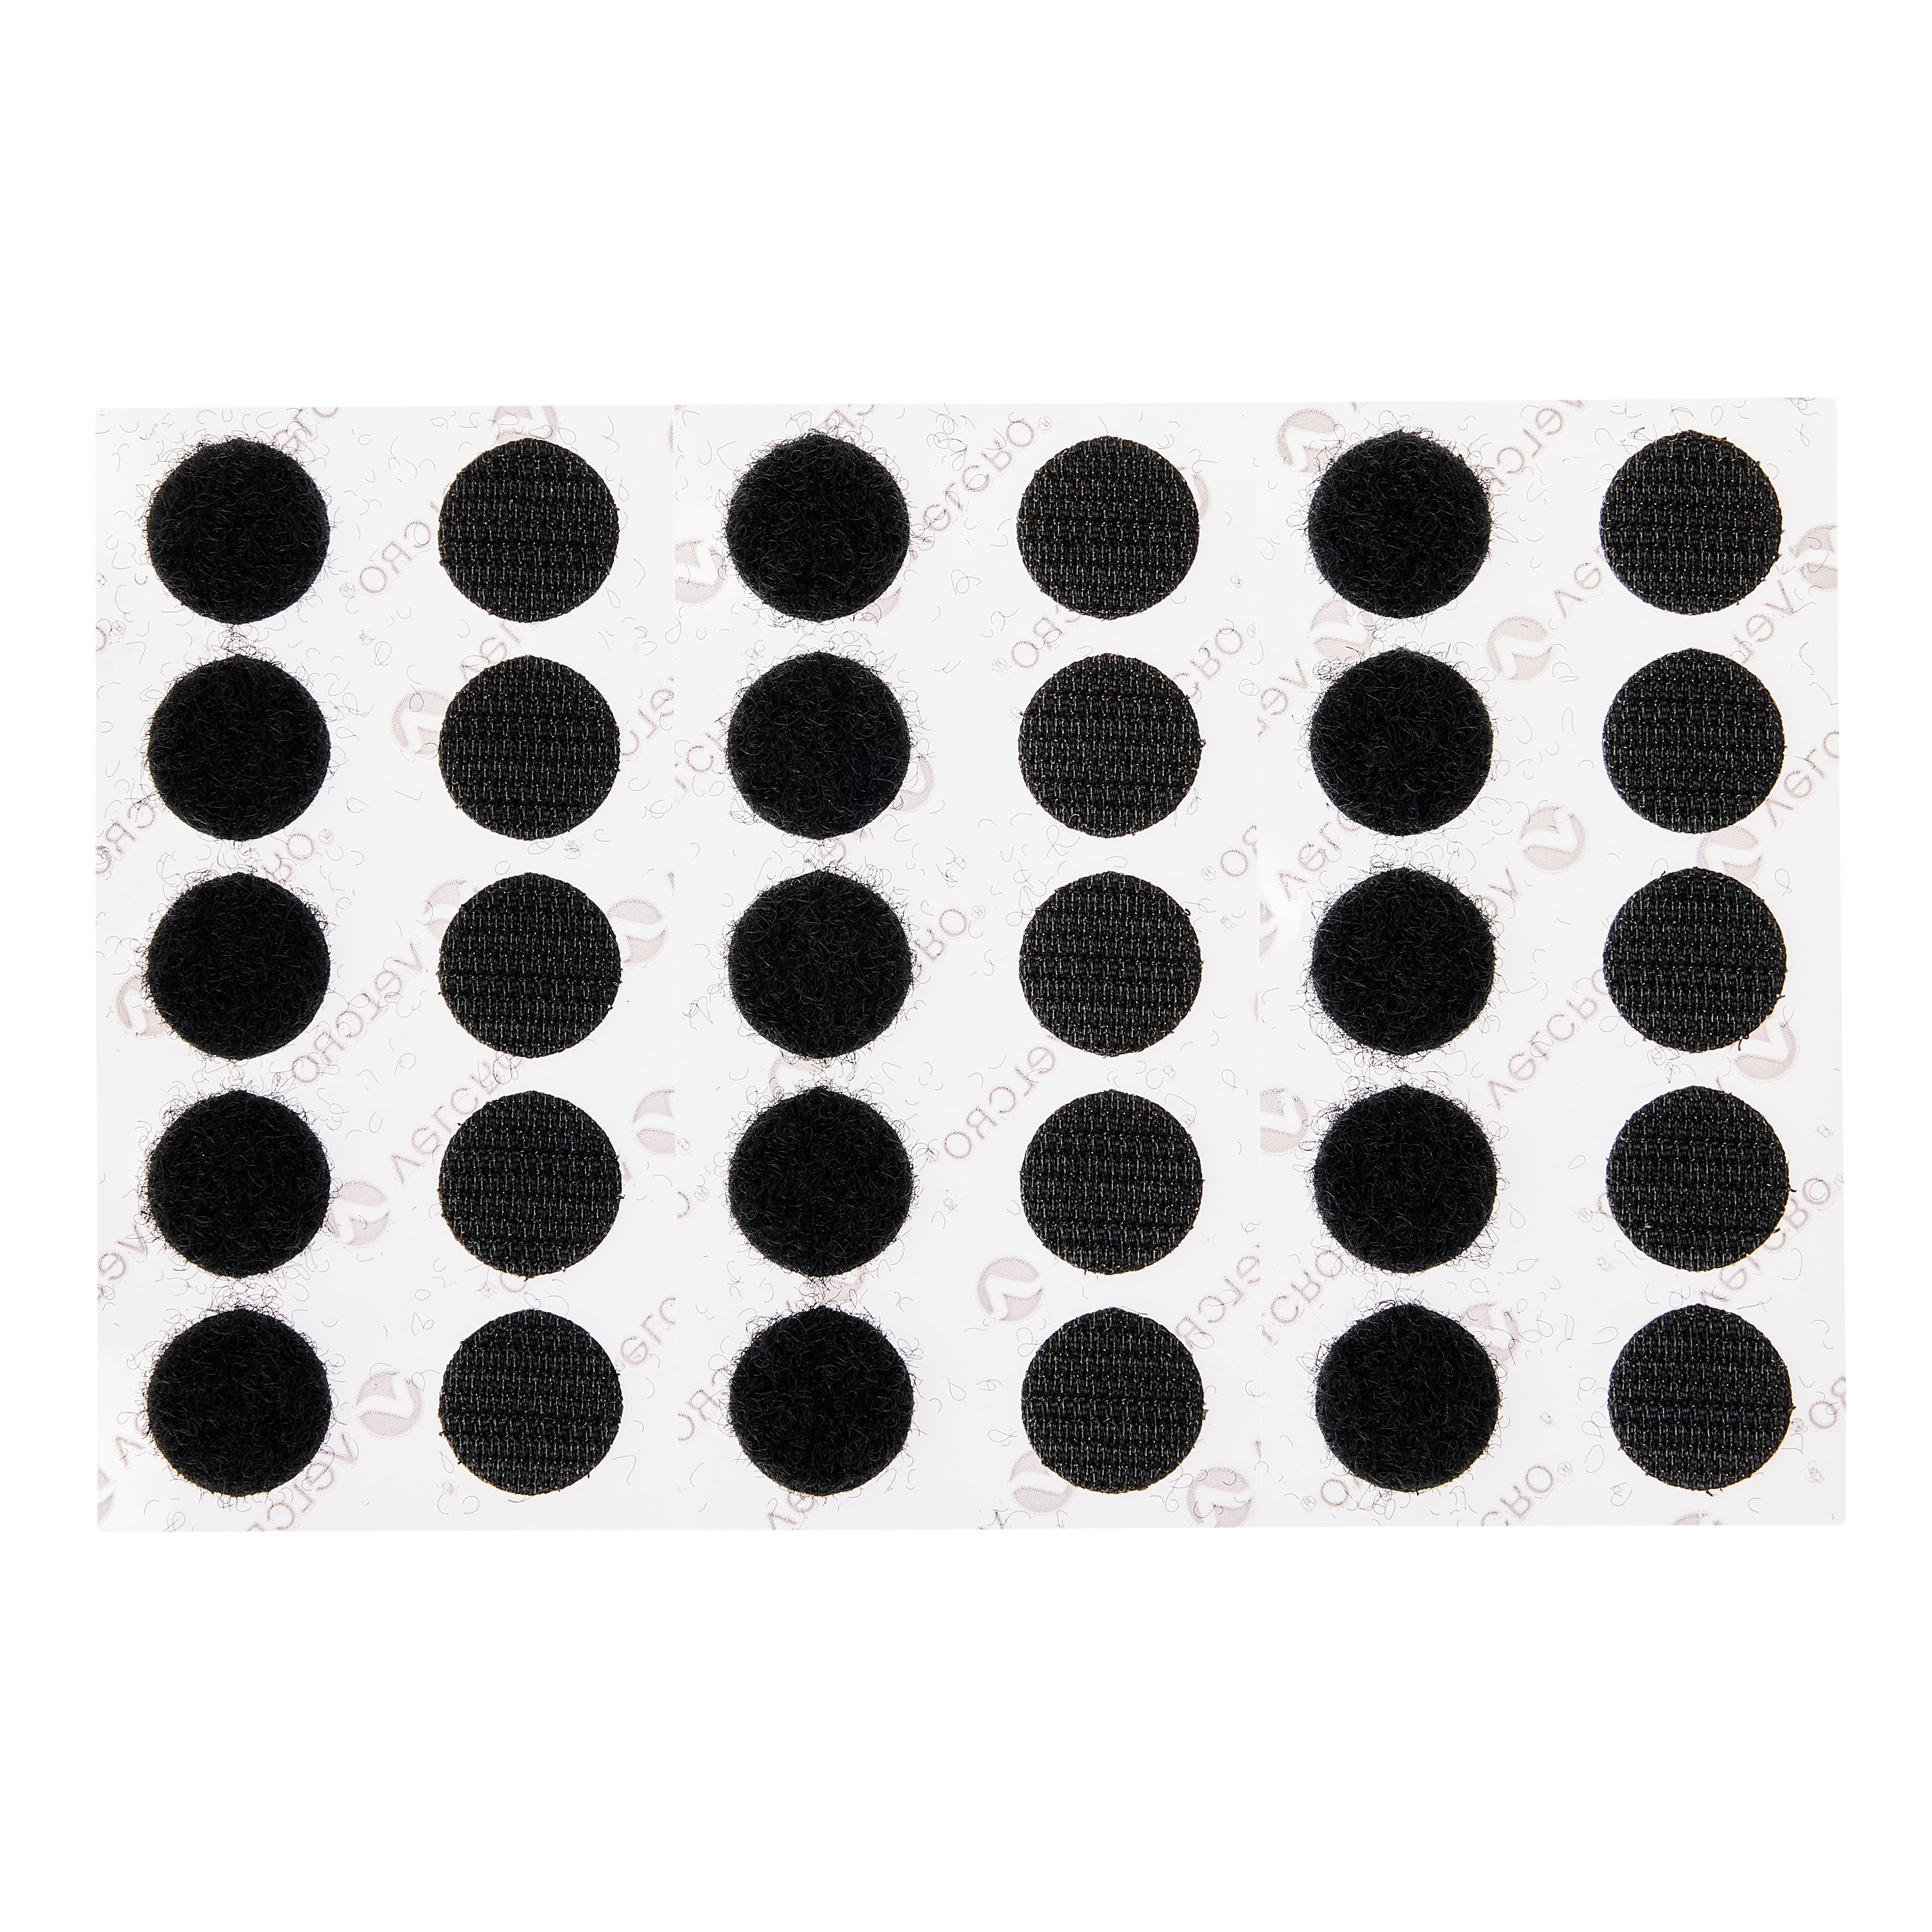 VELCRO Brand Dots with Adhesive | Sticky Back Round Hook and Loop Closures  for Organizing, Arts and Crafts, School Projects, 5/8in Circles White 20 ct